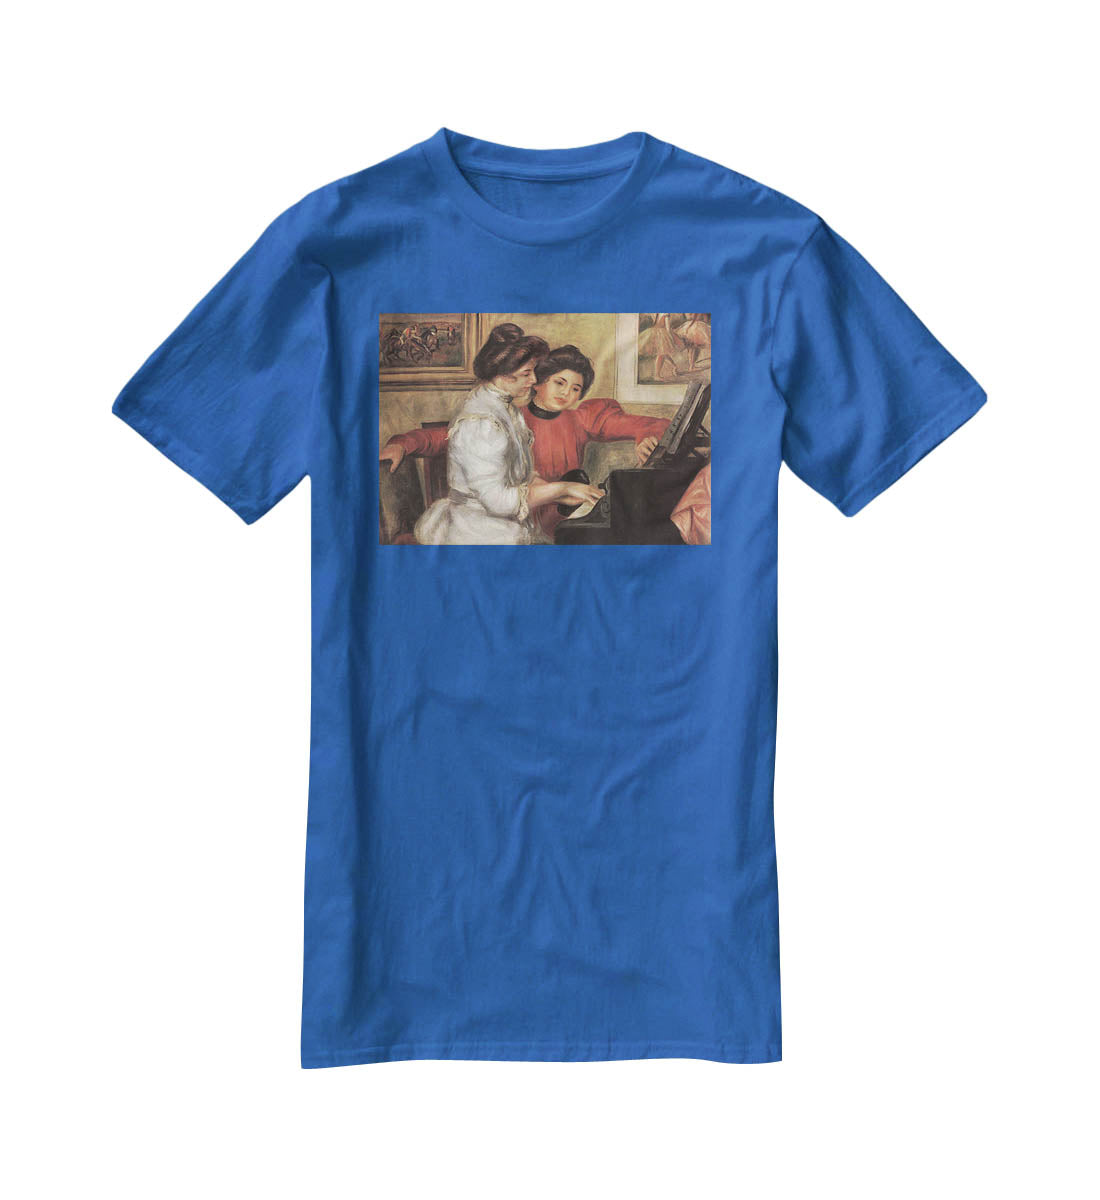 Yvonne and Christine Lerolle at the piano by Renoir T-Shirt - Canvas Art Rocks - 2